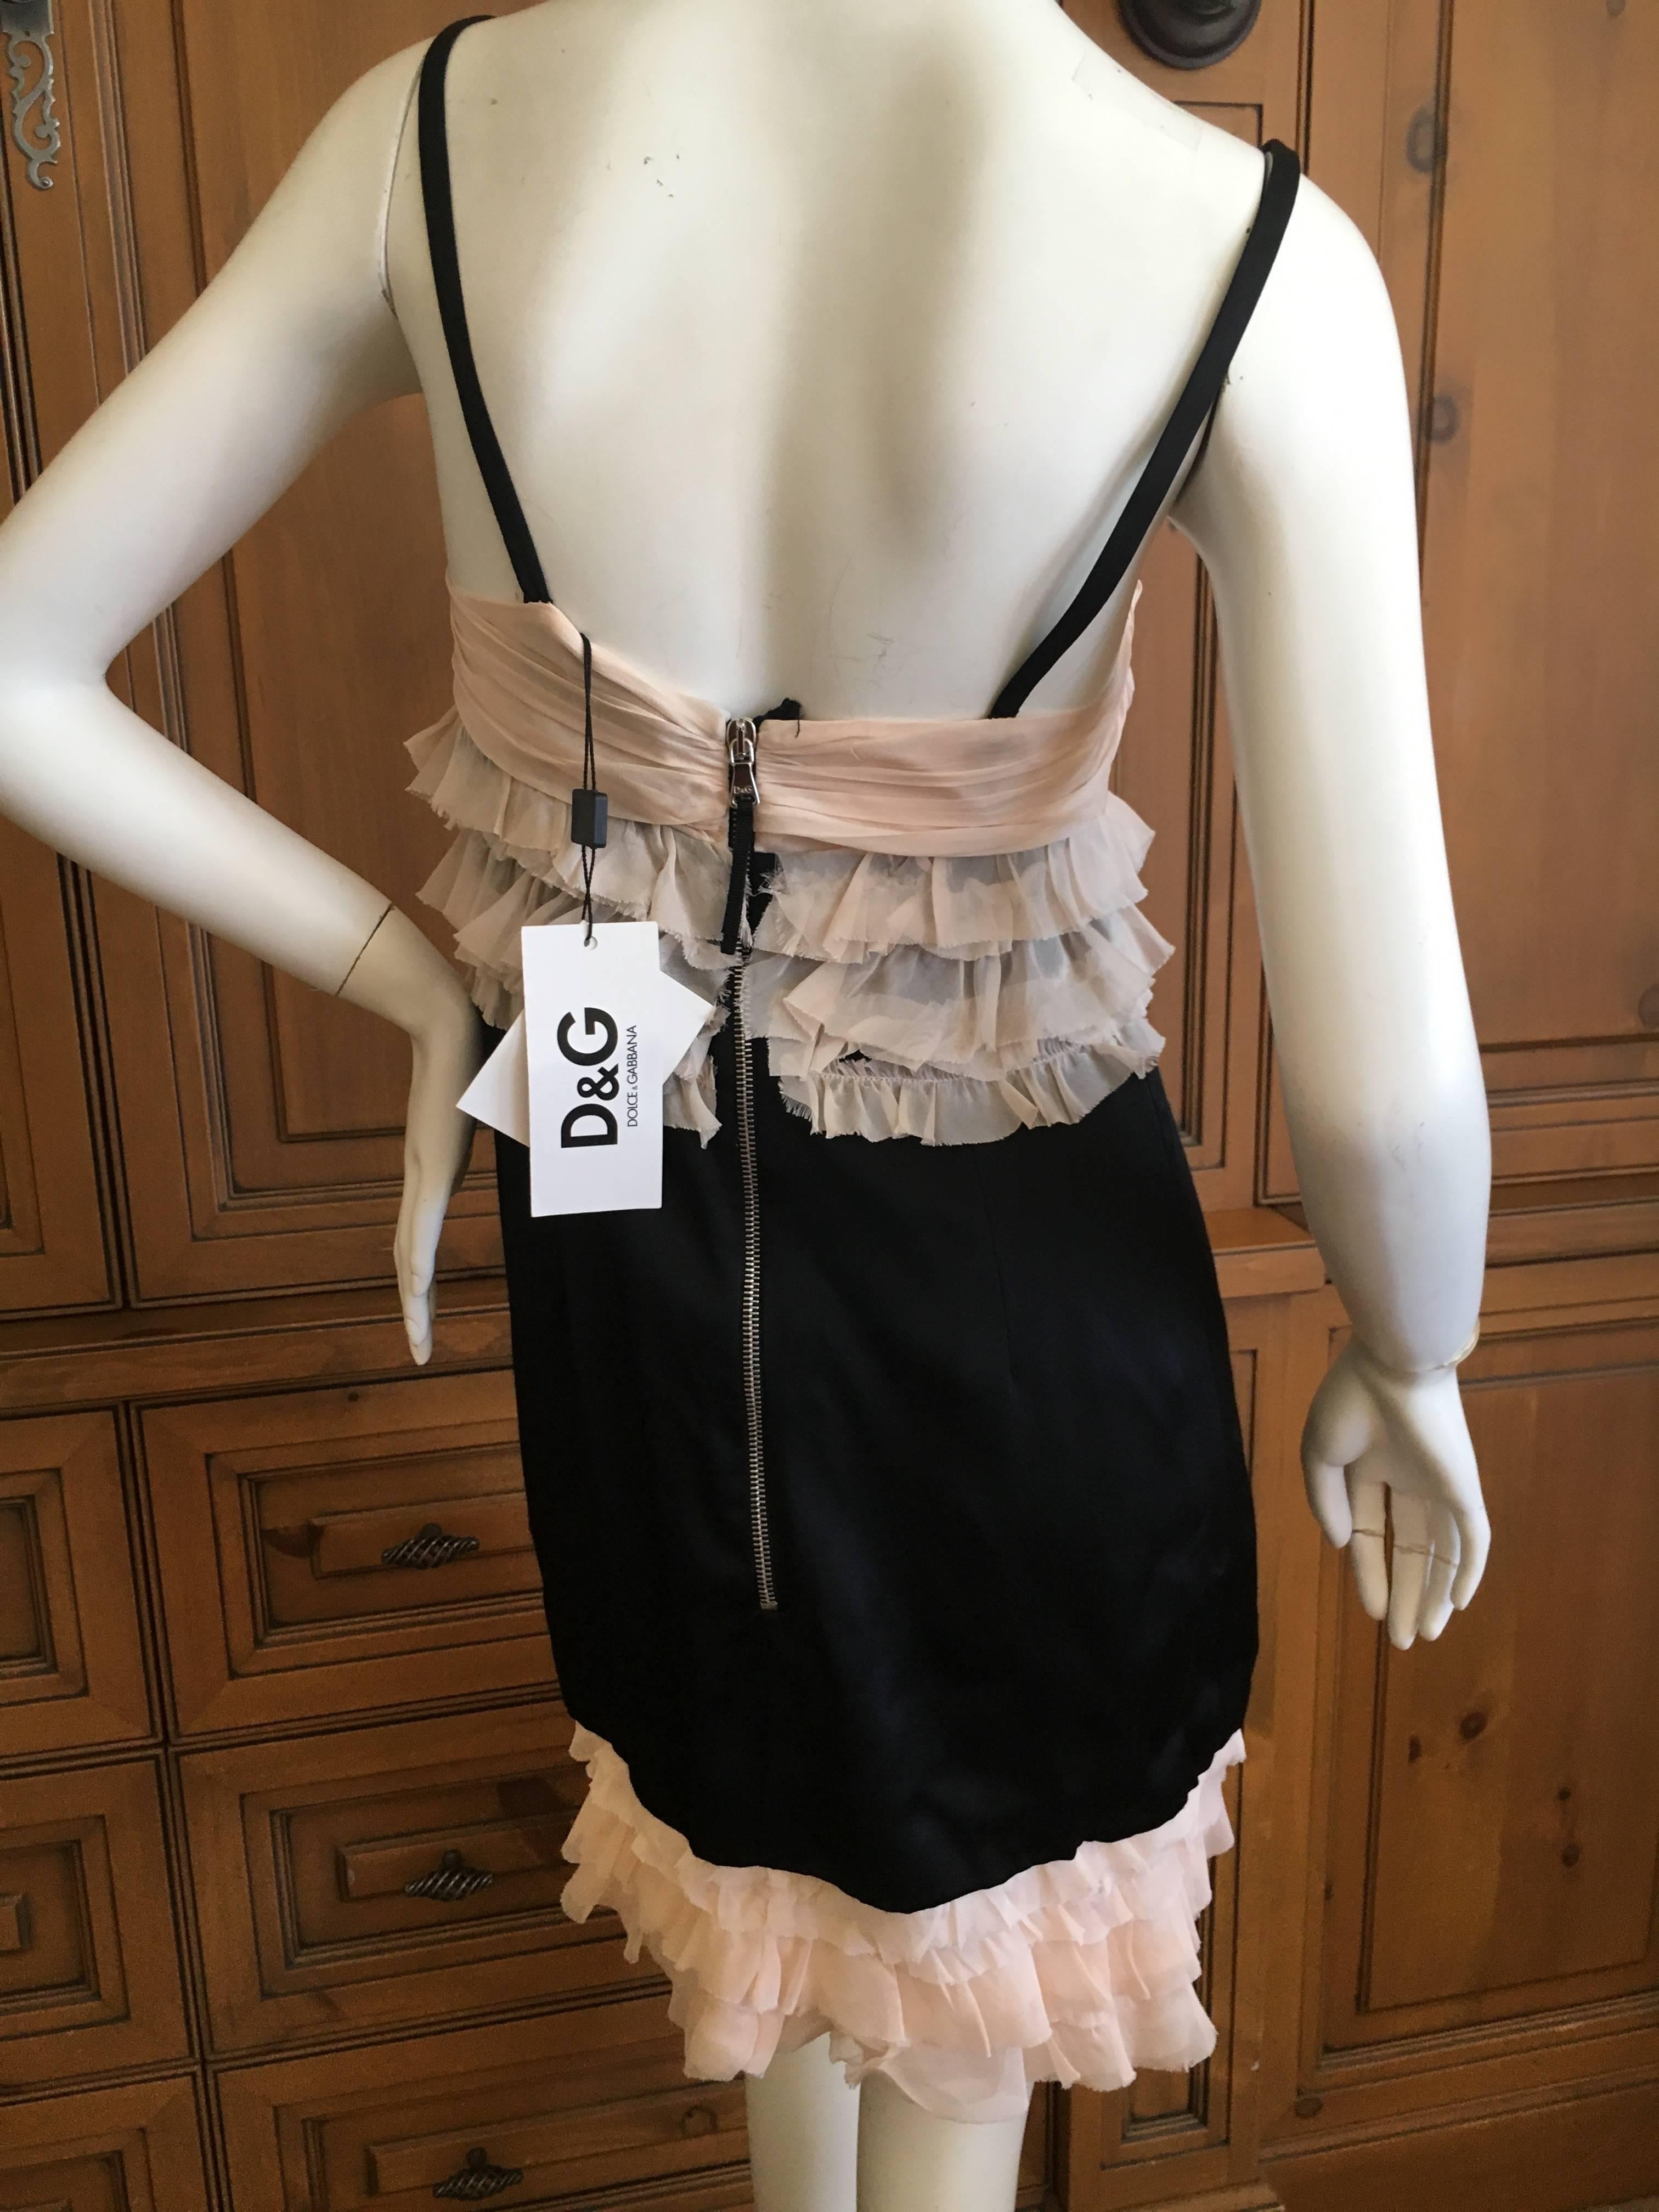 Women's D&G Dolce & Gabbana Ruffle Black and Blush Mini Dress New with Tags For Sale